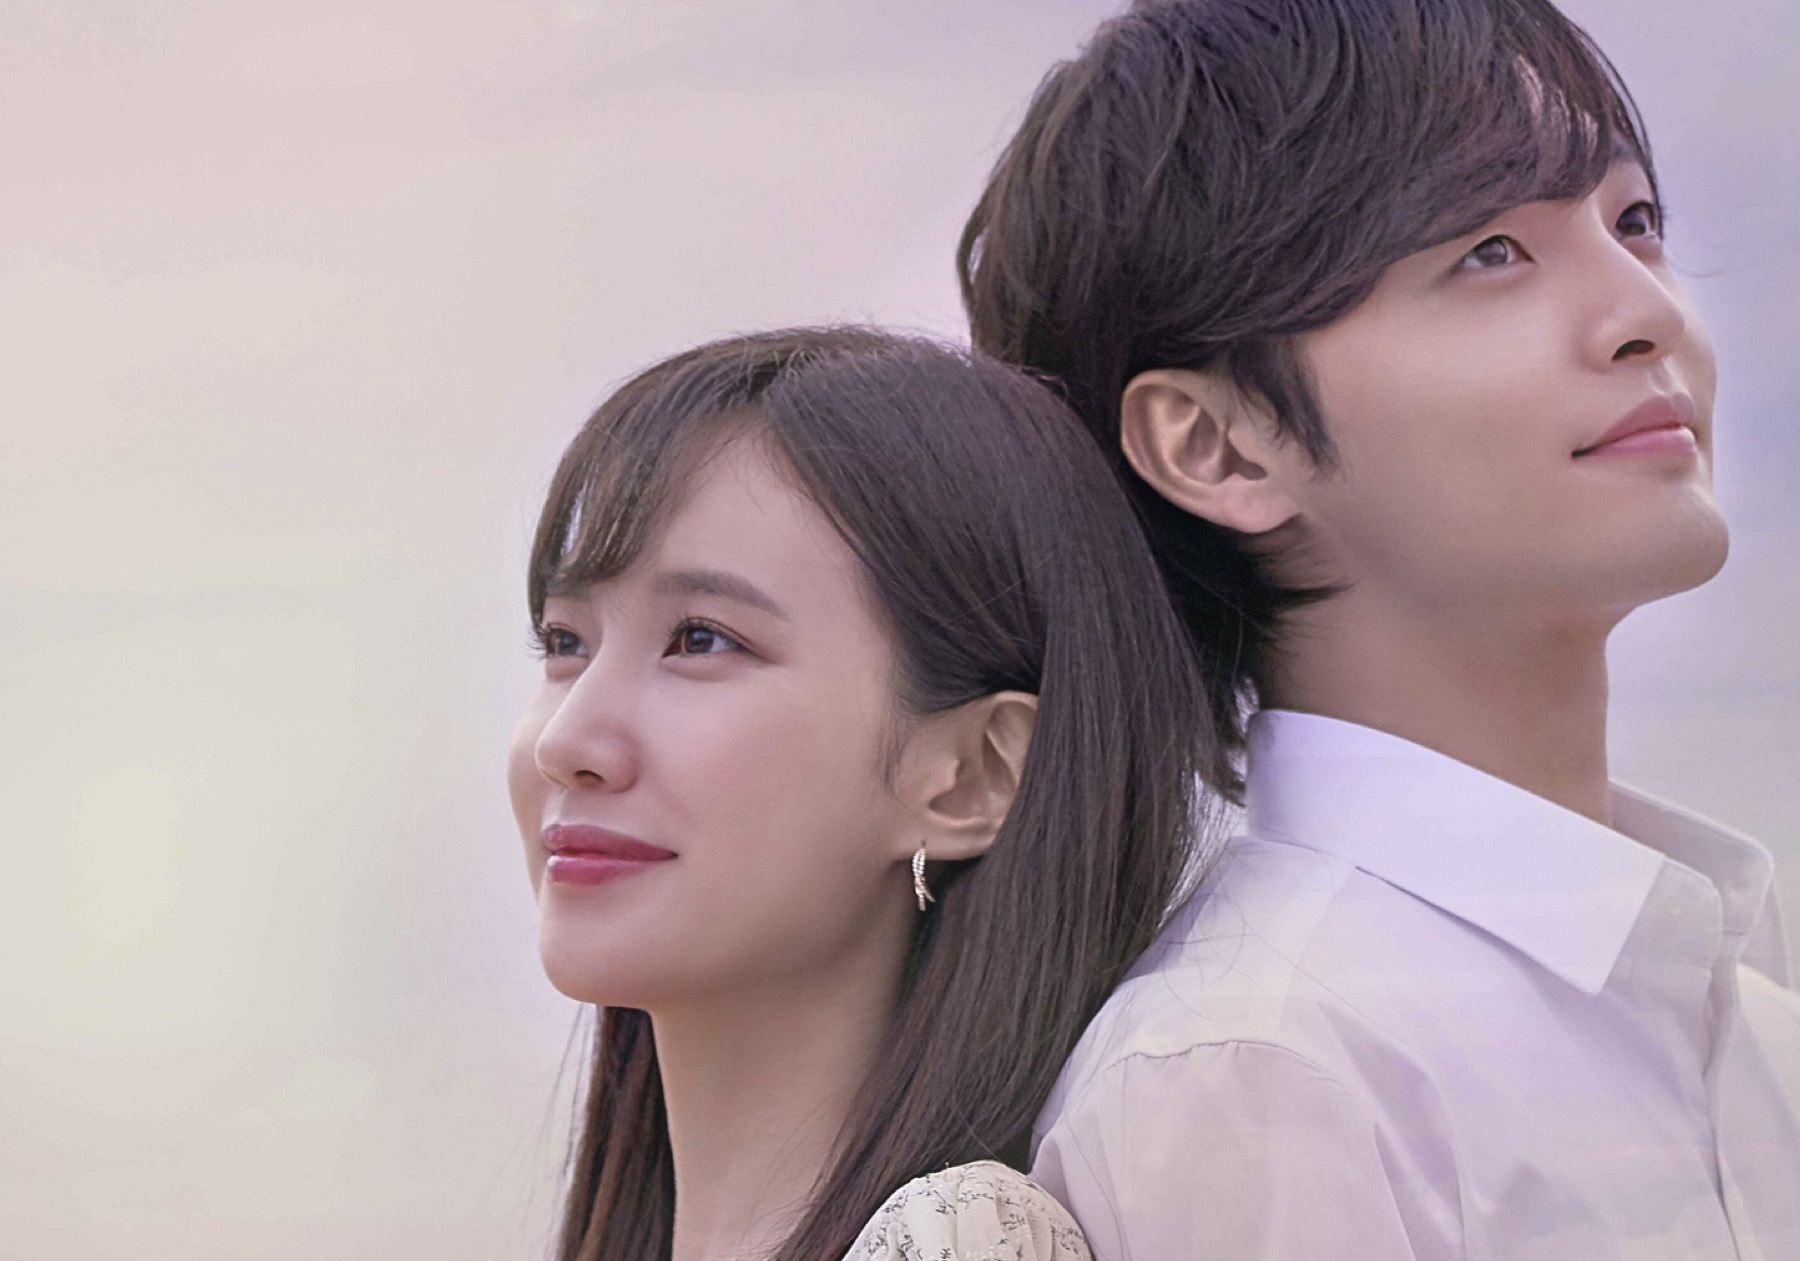 SBS release posters and teasers for upcoming drama ‘Do You Like Brahms?’